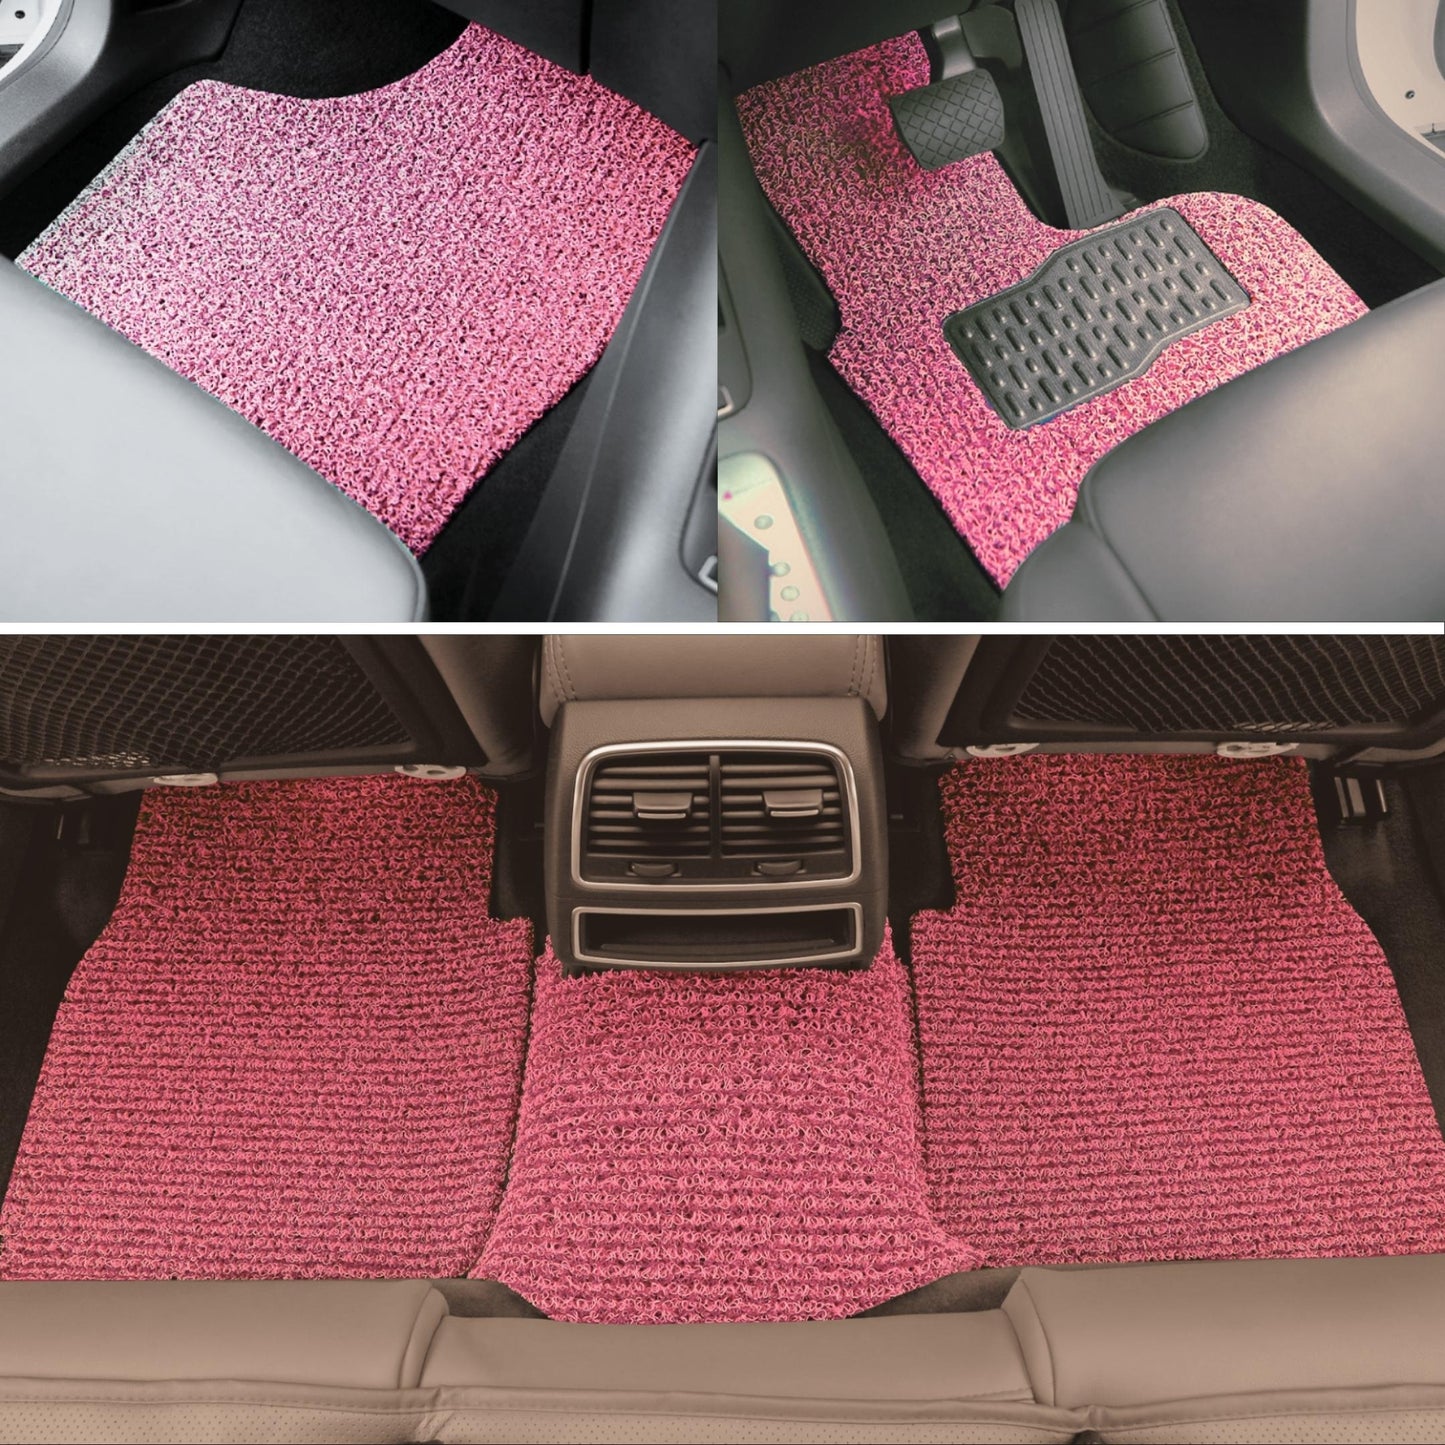 [Colour Change] Upgrade to Our Special Car Mat Colour Selection